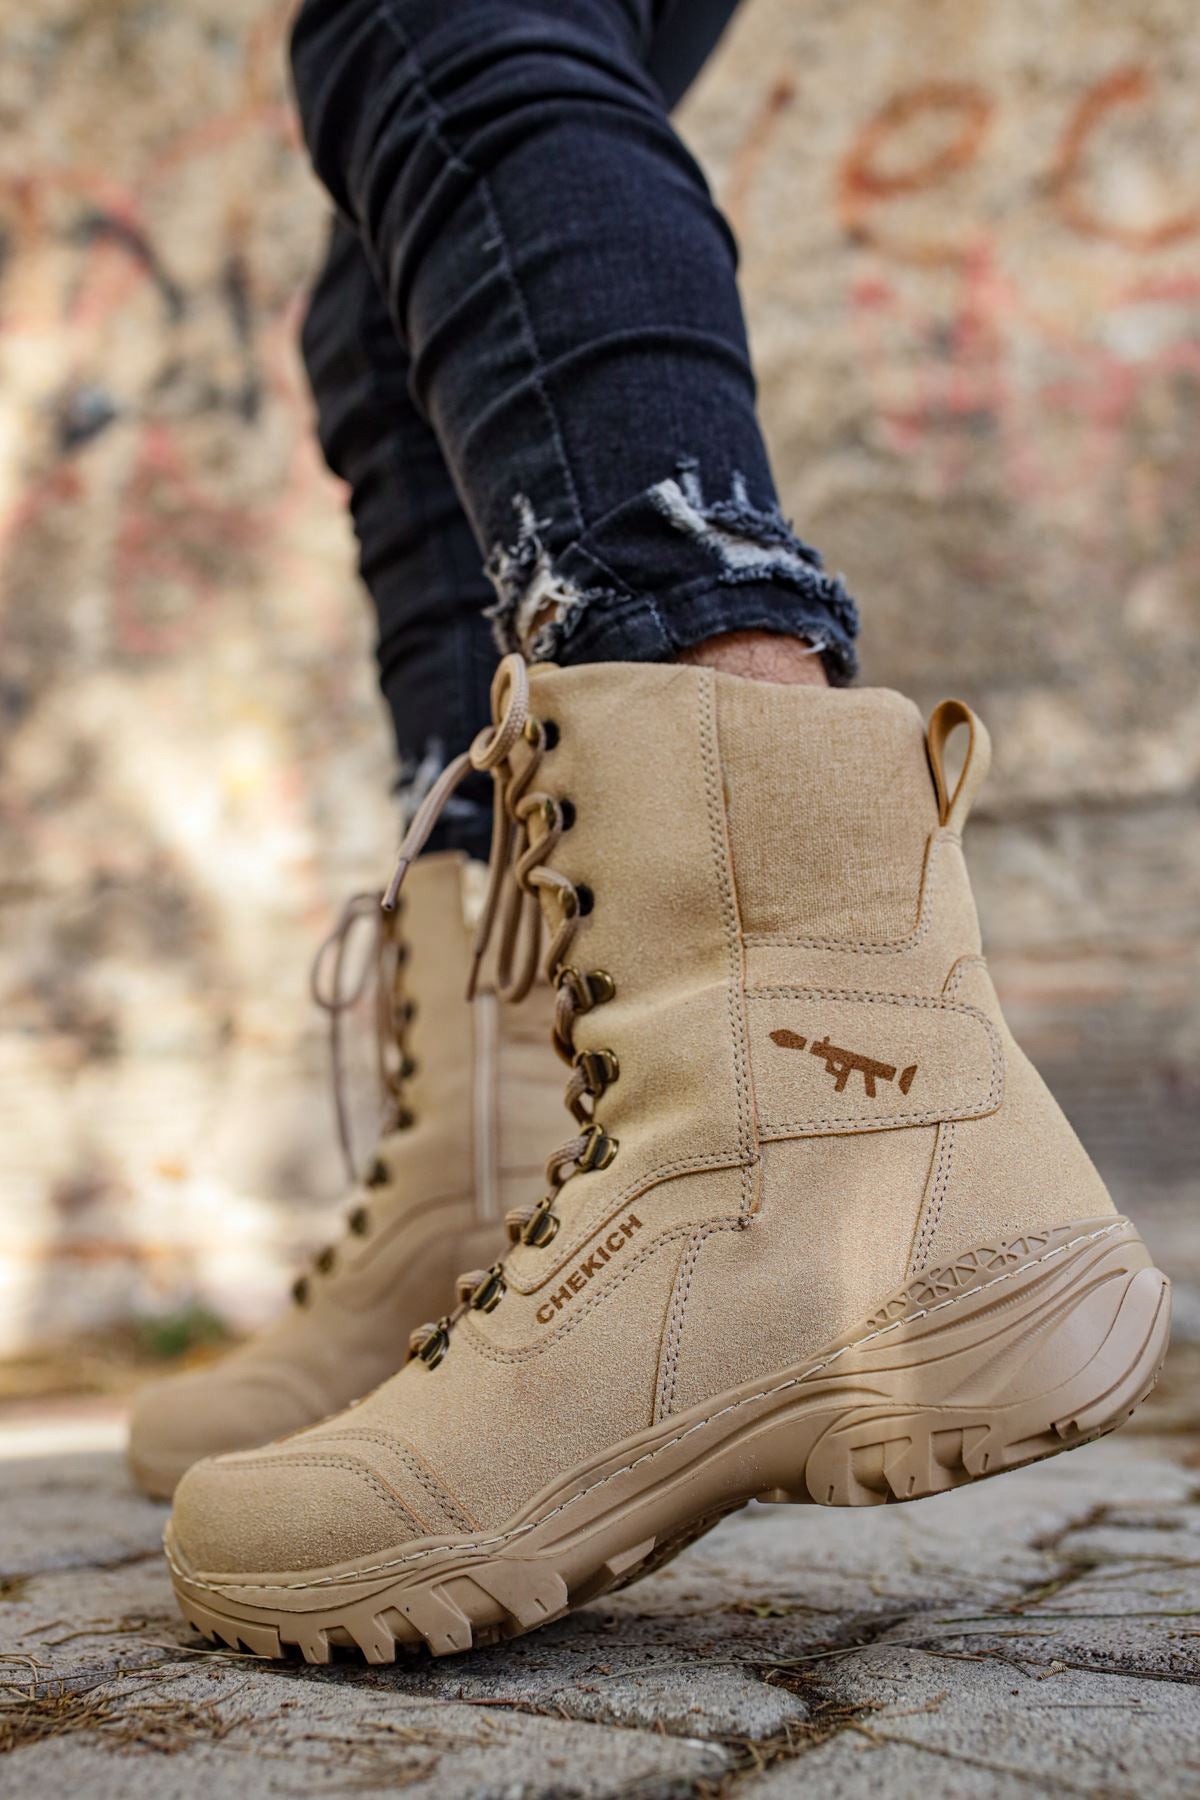 CH051 Suede Tactical Military Men's Sneaker Boots - Sand Color - STREETMODE ™